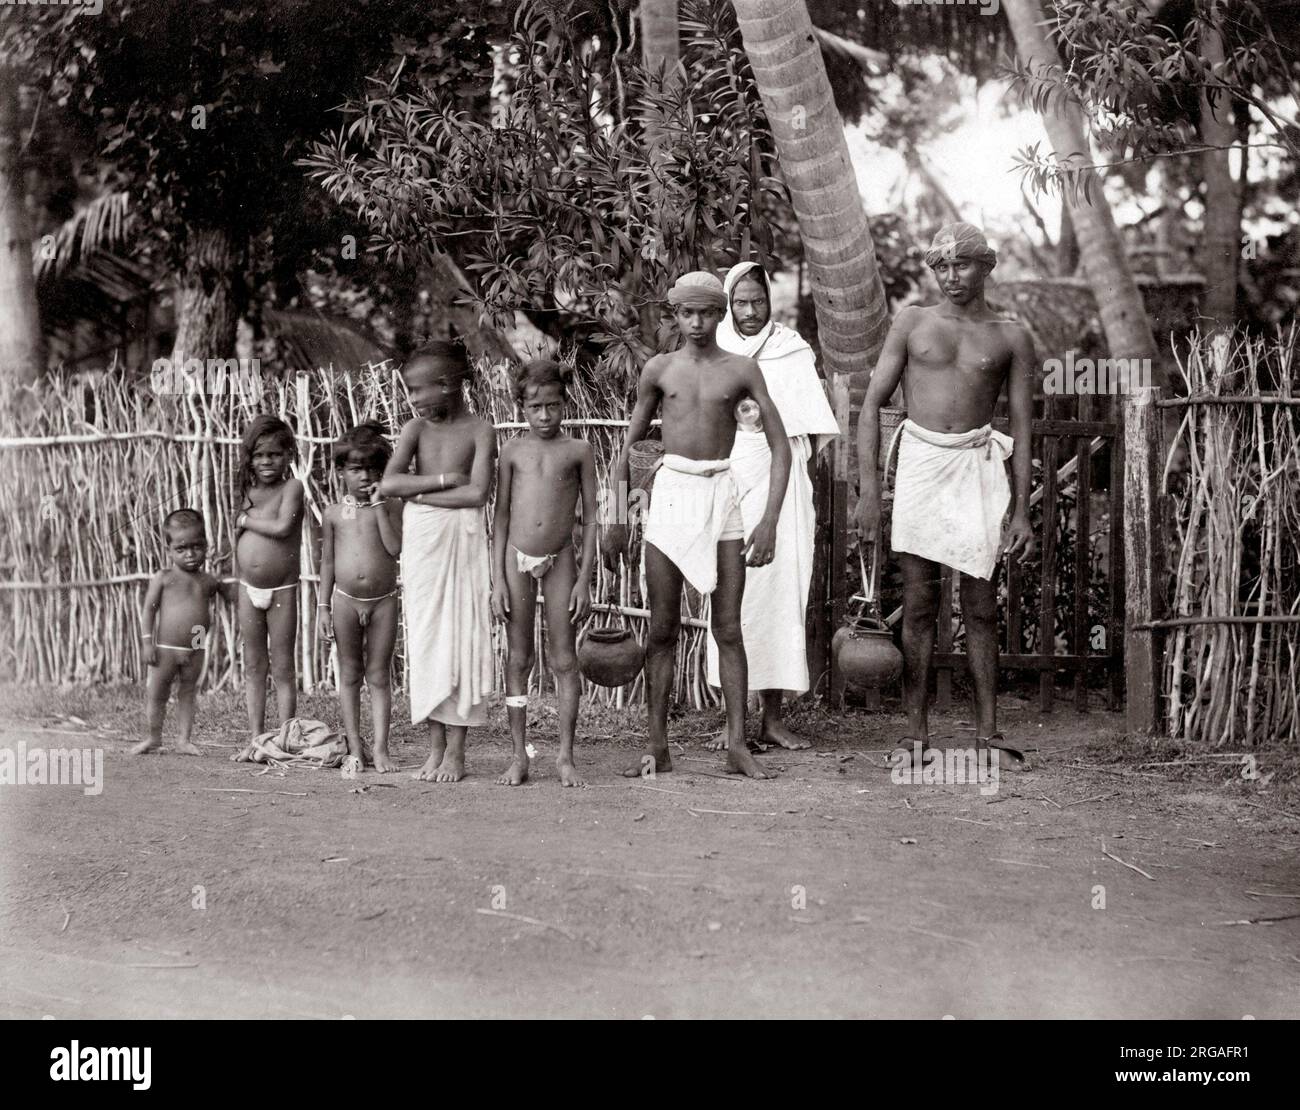 https://c8.alamy.com/comp/2RGAFR1/c-1880s-india-group-of-men-and-boys-with-pots-2RGAFR1.jpg